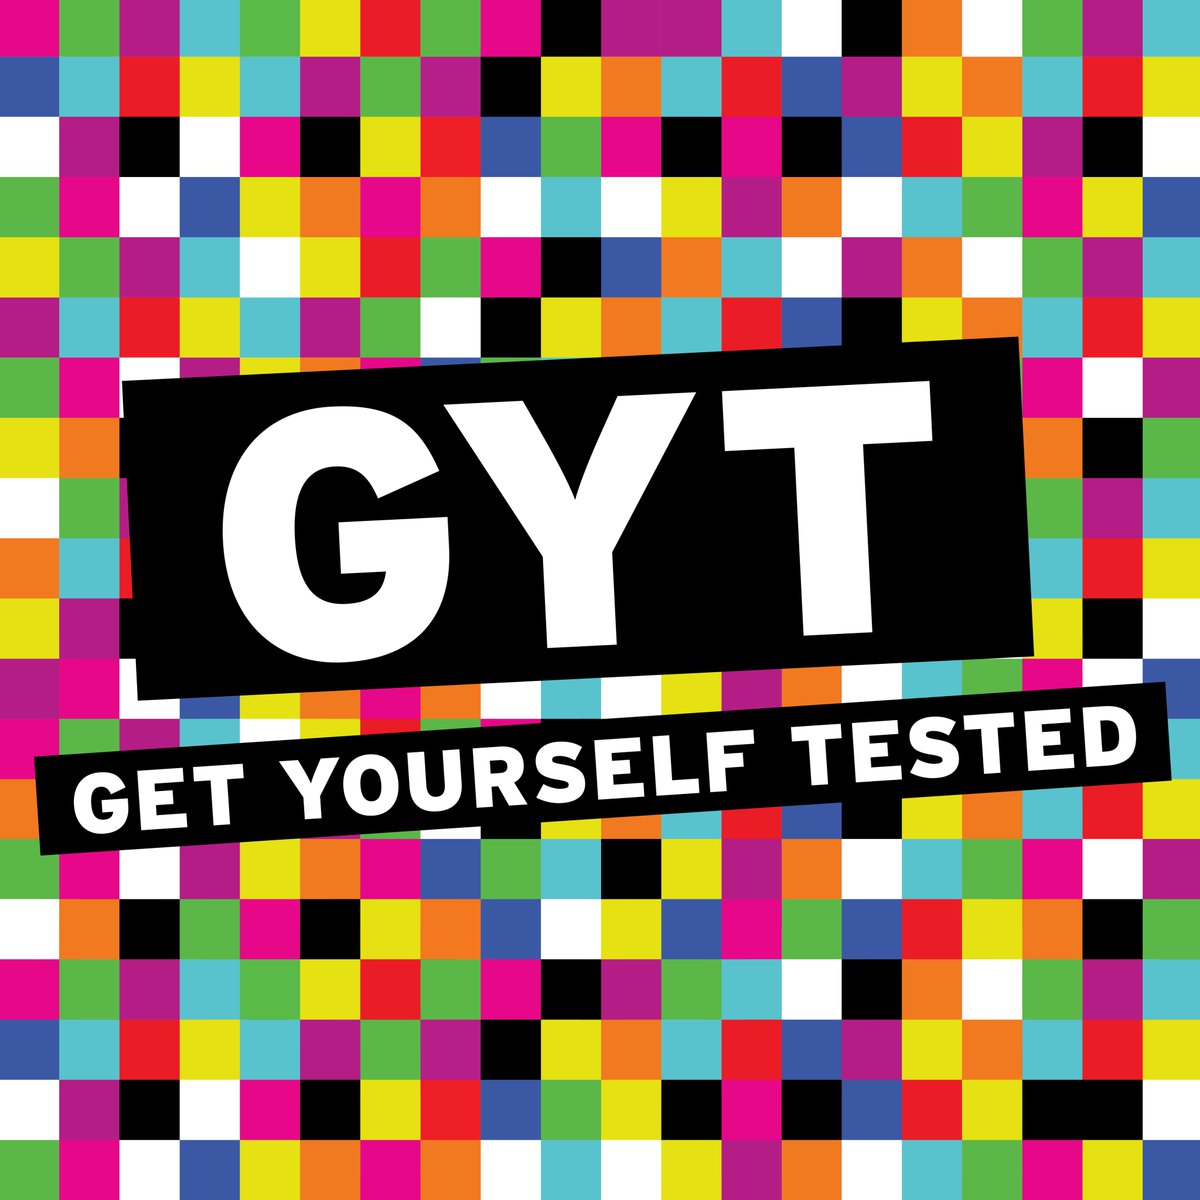 STI Awareness Week is here! Join the conversation with #STIweek to get involved and learn how you can take action to help overcome the rise of #STIs in the U.S. bit.ly/3MqXnnk #GYT